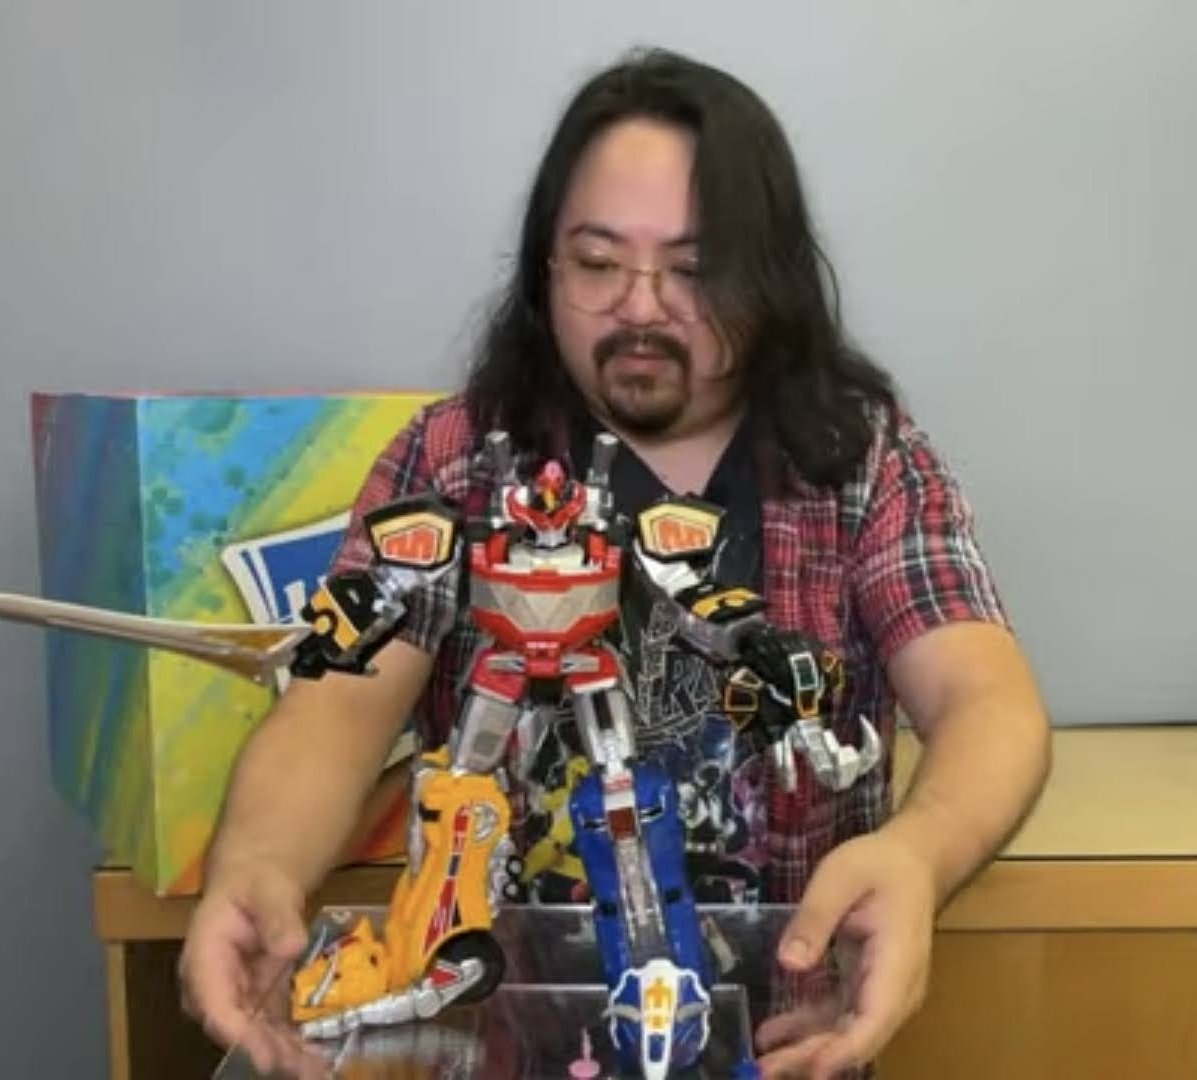 Reminder, tomorrow is a #FanFirstFriday event! Per the announcement we will be seeing more details on the new Zord Ascension Project Dino Megazord shown off back at Pulse Con as well as a segment on the comics. 

Will they reveal the Dragonzord that's coming too? Who knows!